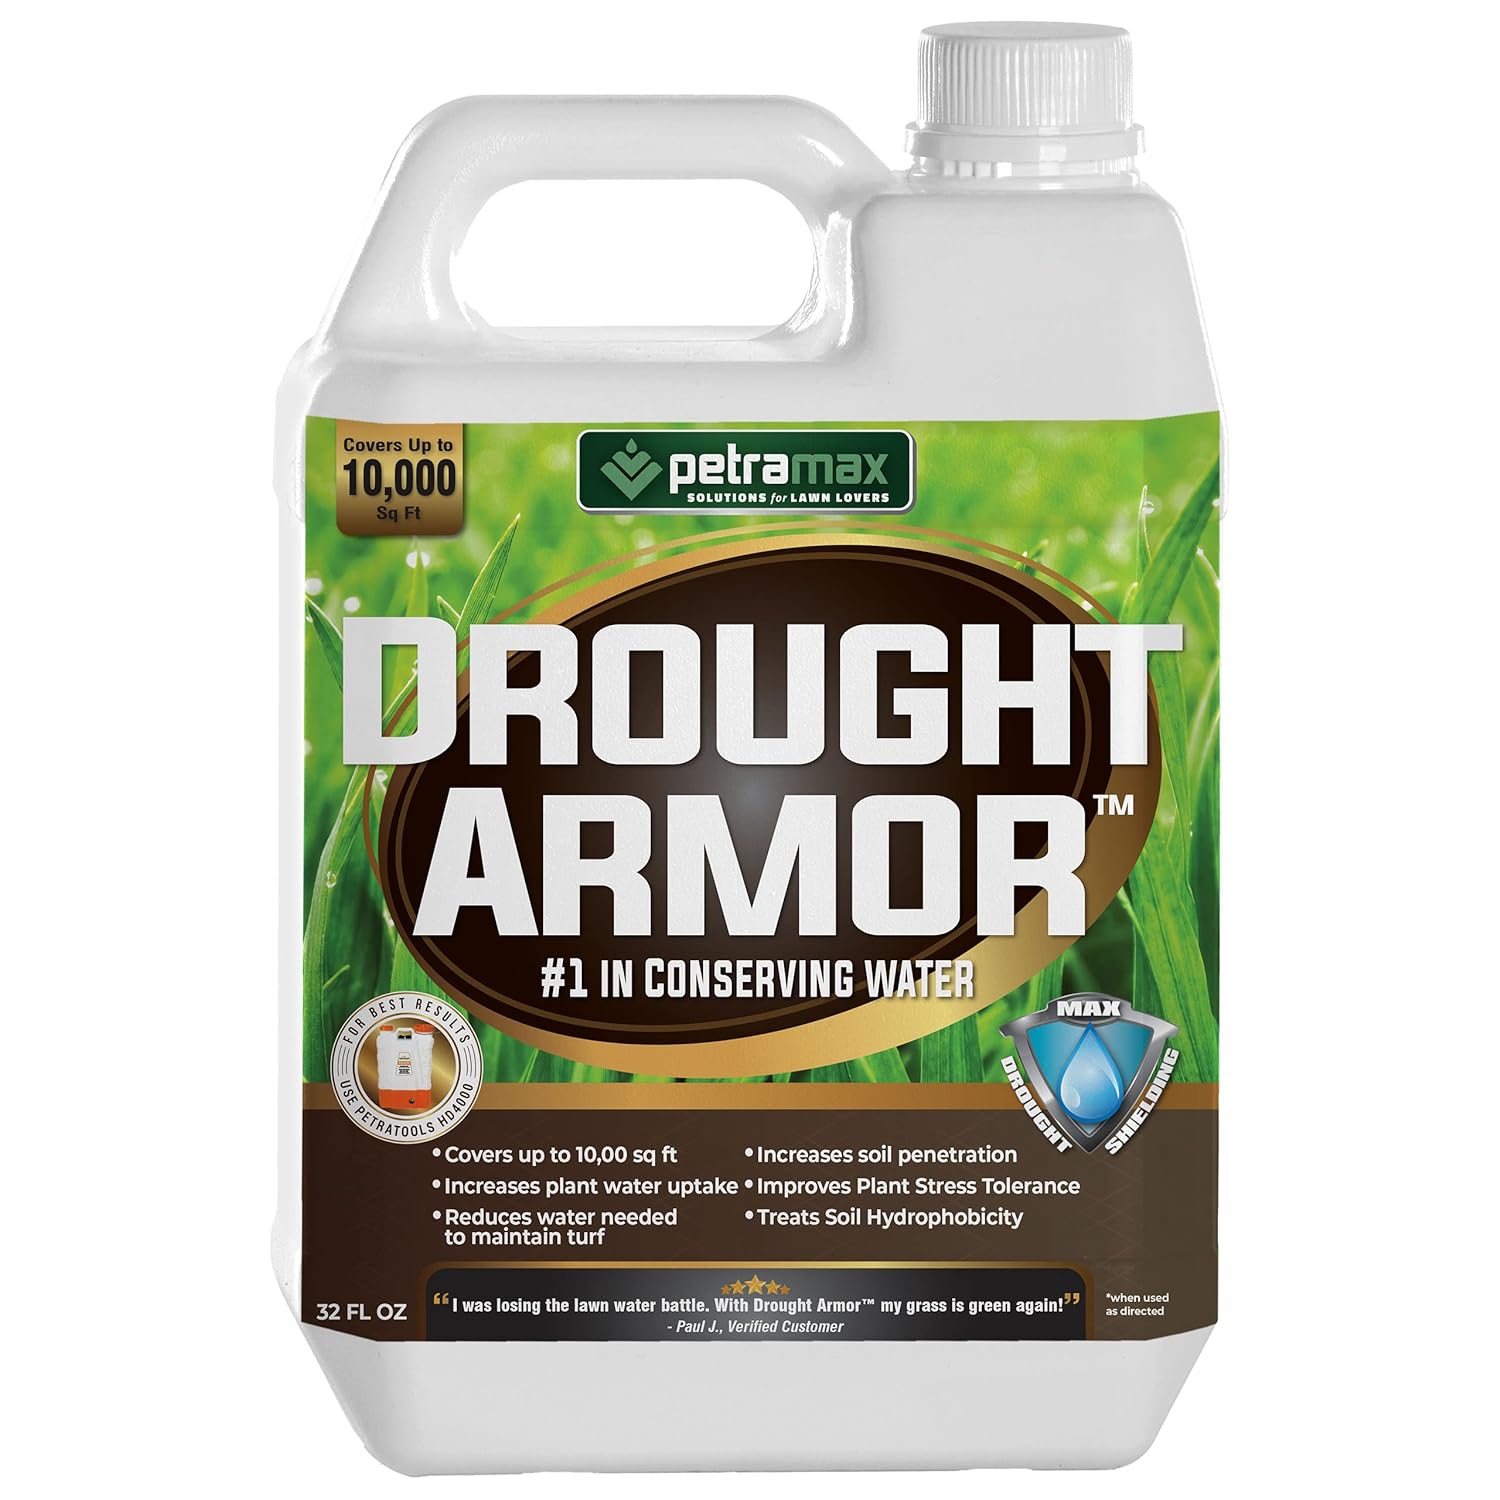 Transform Your Lawn with PetraMax Lawn & Turf Drought Armor: The Ultimate Drought Defense